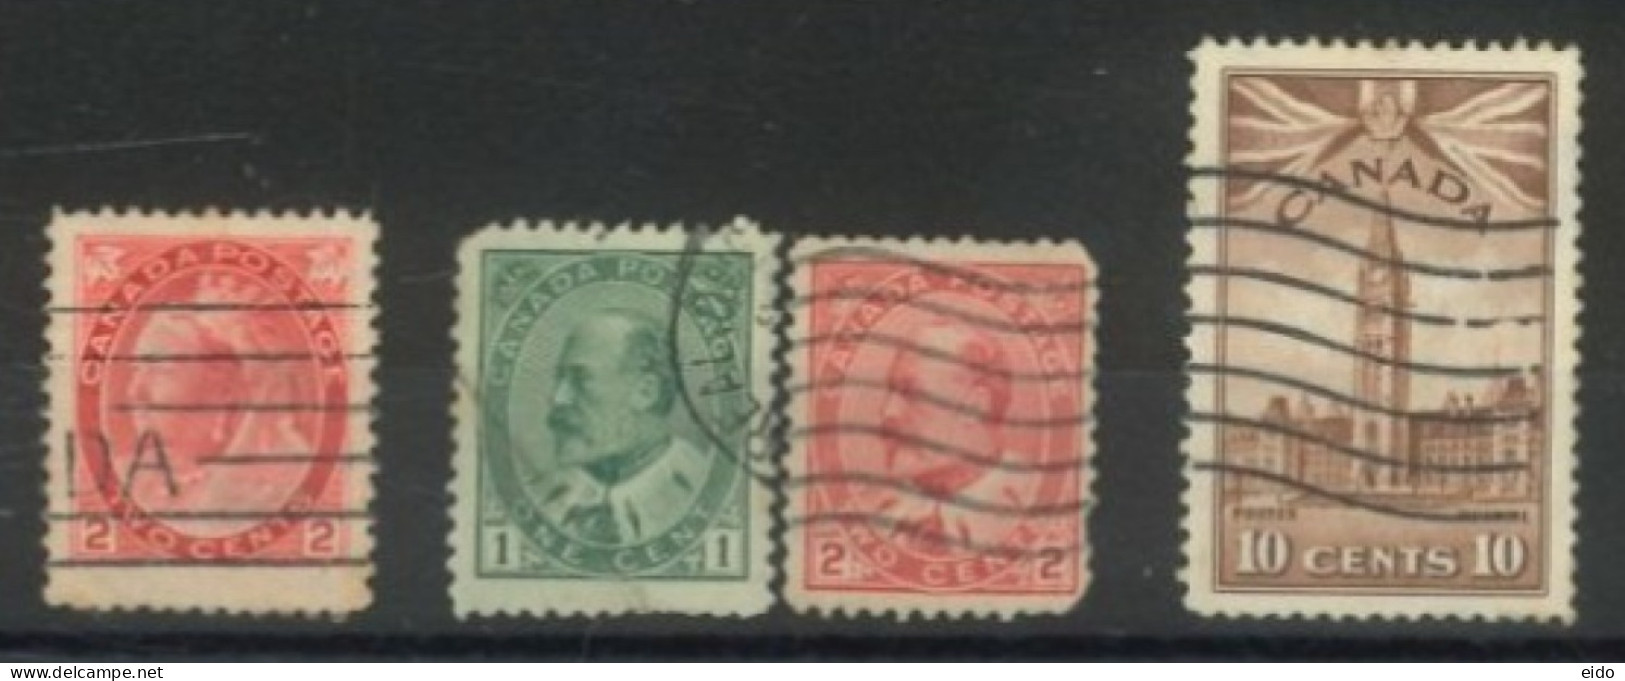 CANADA -  STAMPS SET OF 4, USED. - Gebraucht